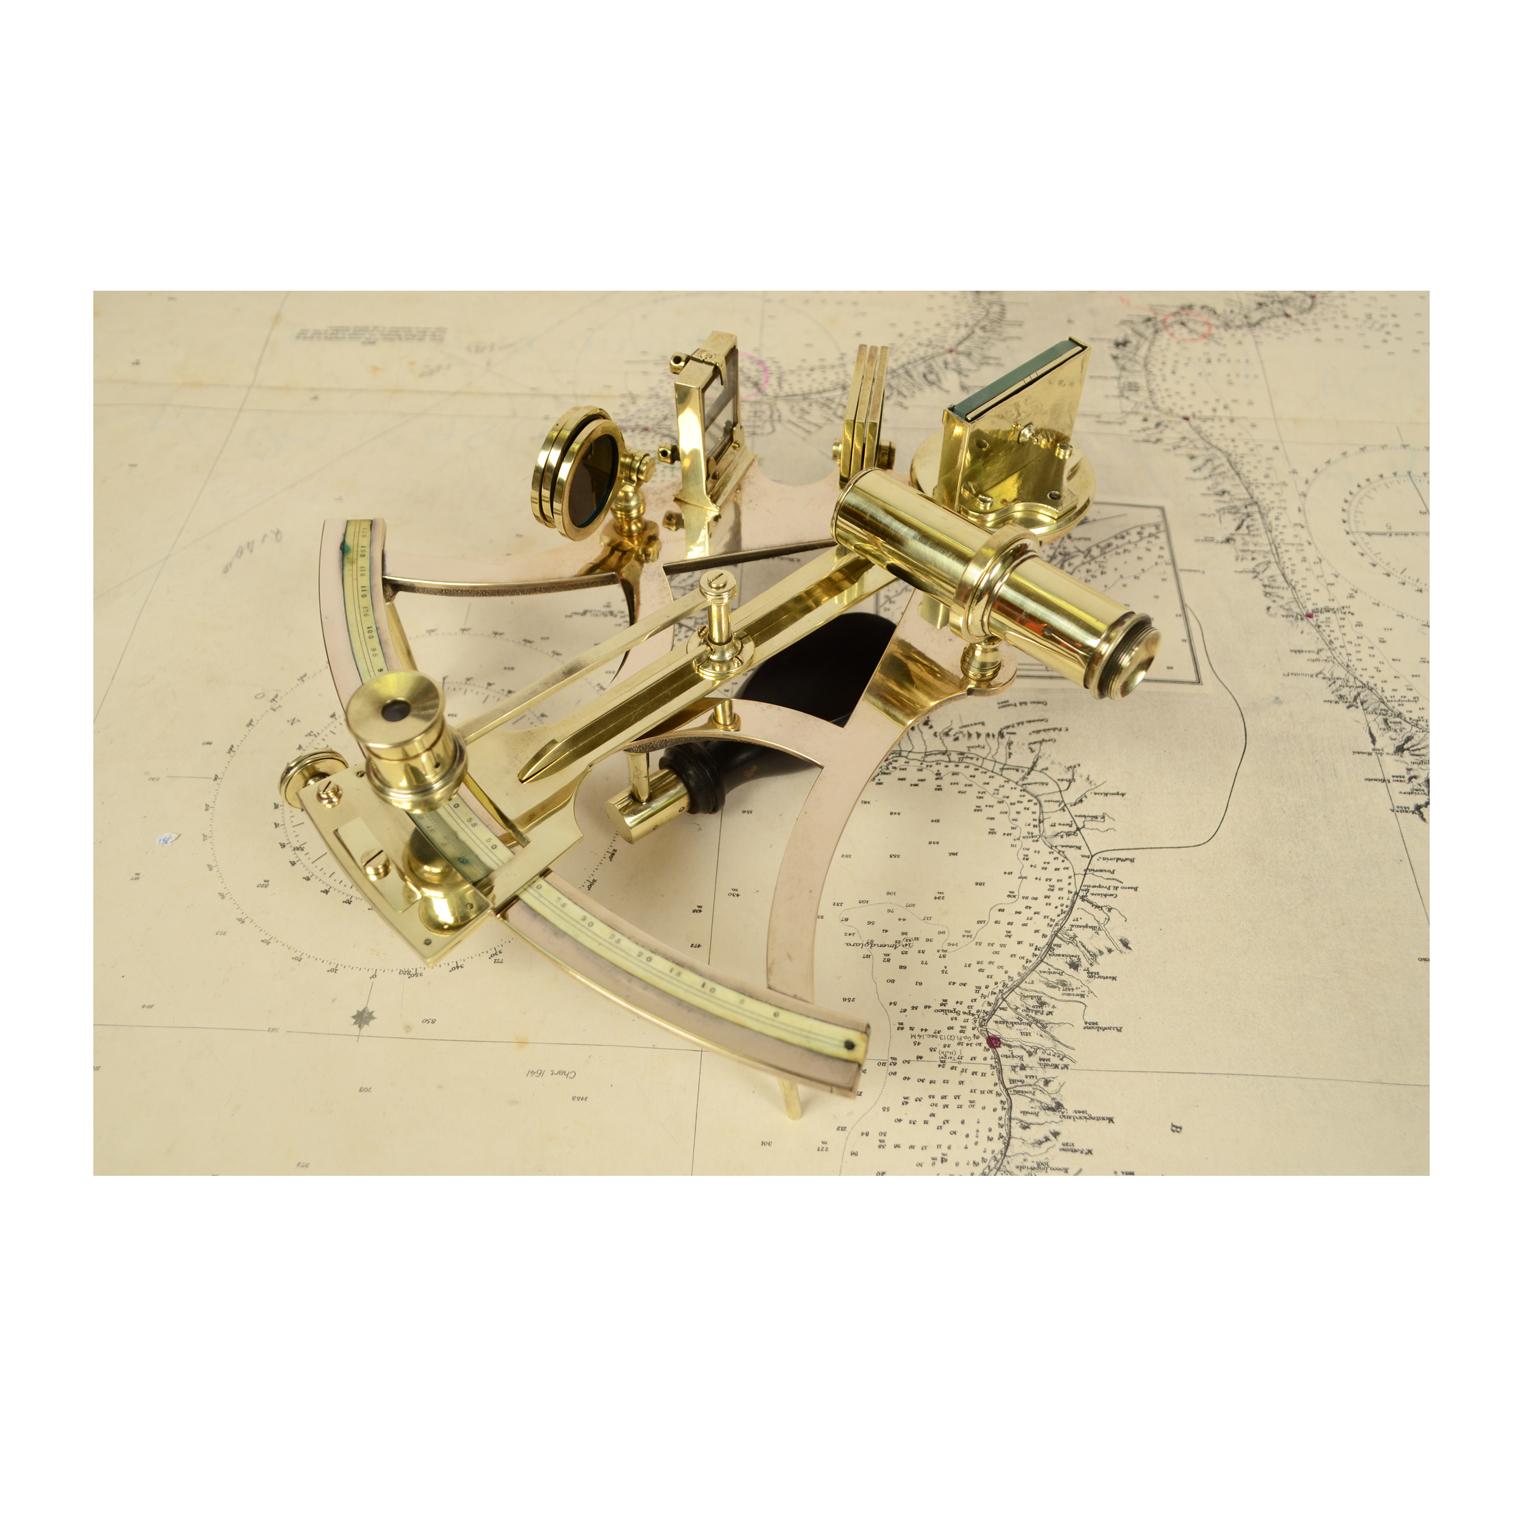 British Brass Sextant Signed W.R Williams Dock St. Newport from the Mid-19th Century